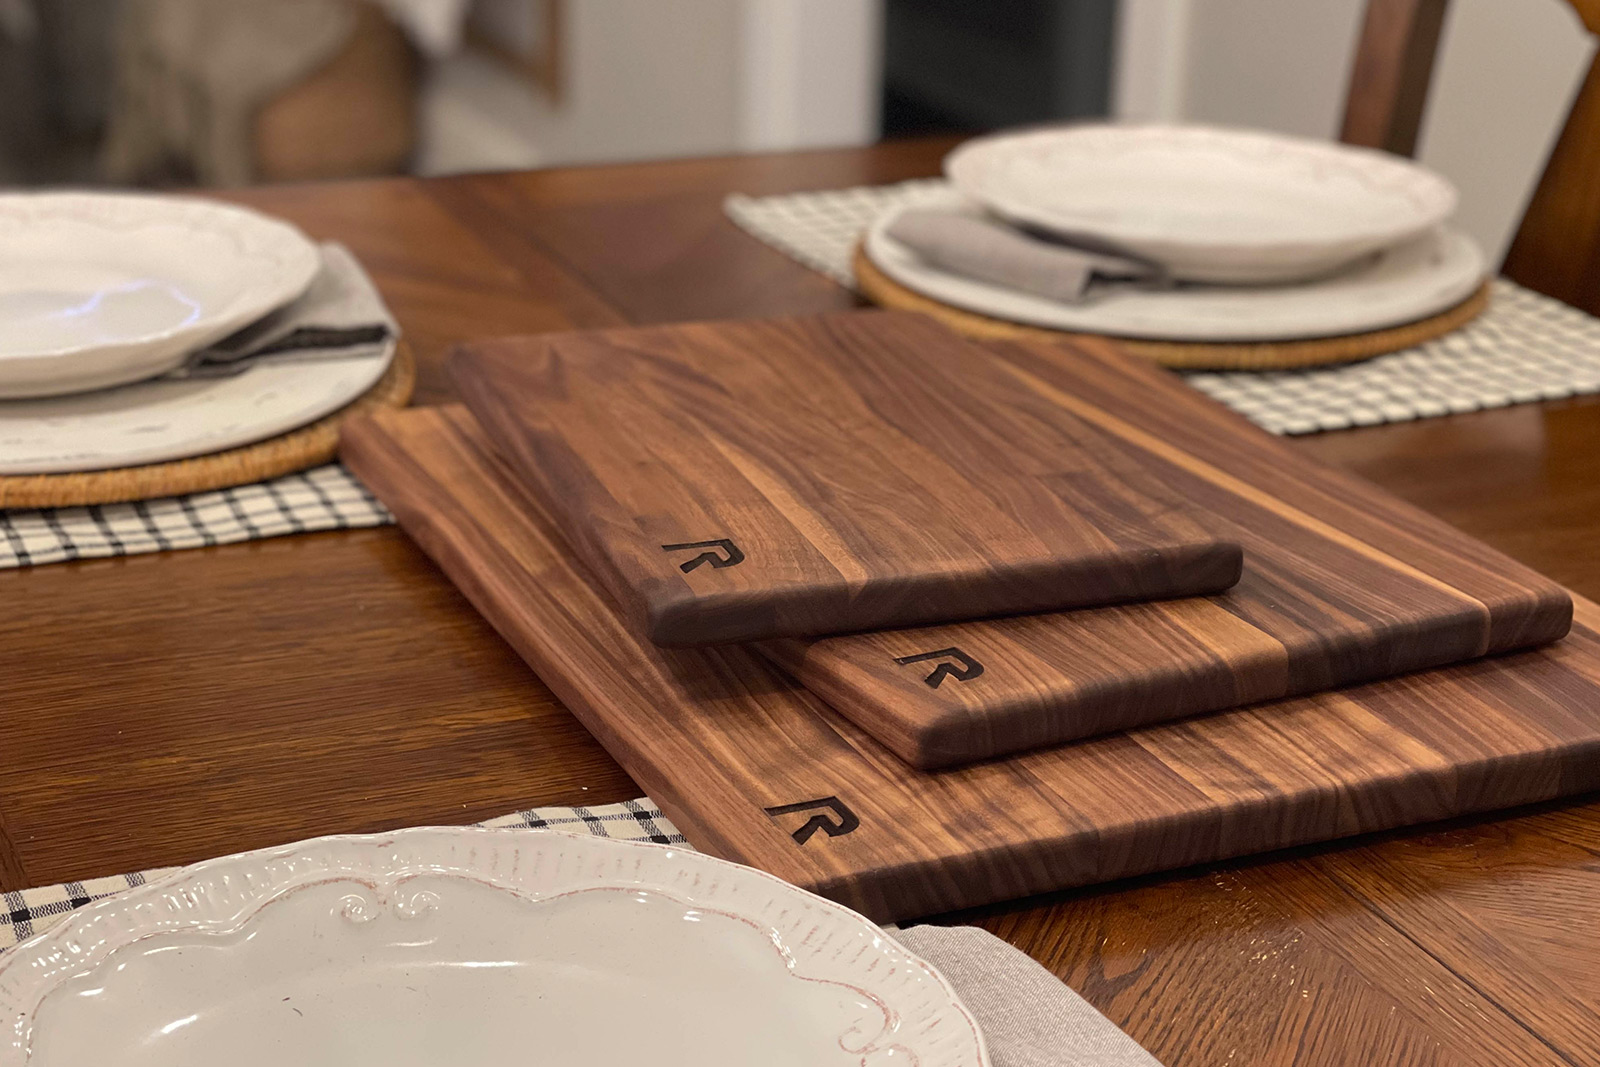 RoseWood & Co Cutting board set- Utility set is heavy duty for BBQ, brisket, grilling and will last a lifetime. Our cutting blocks are handmade in the US.